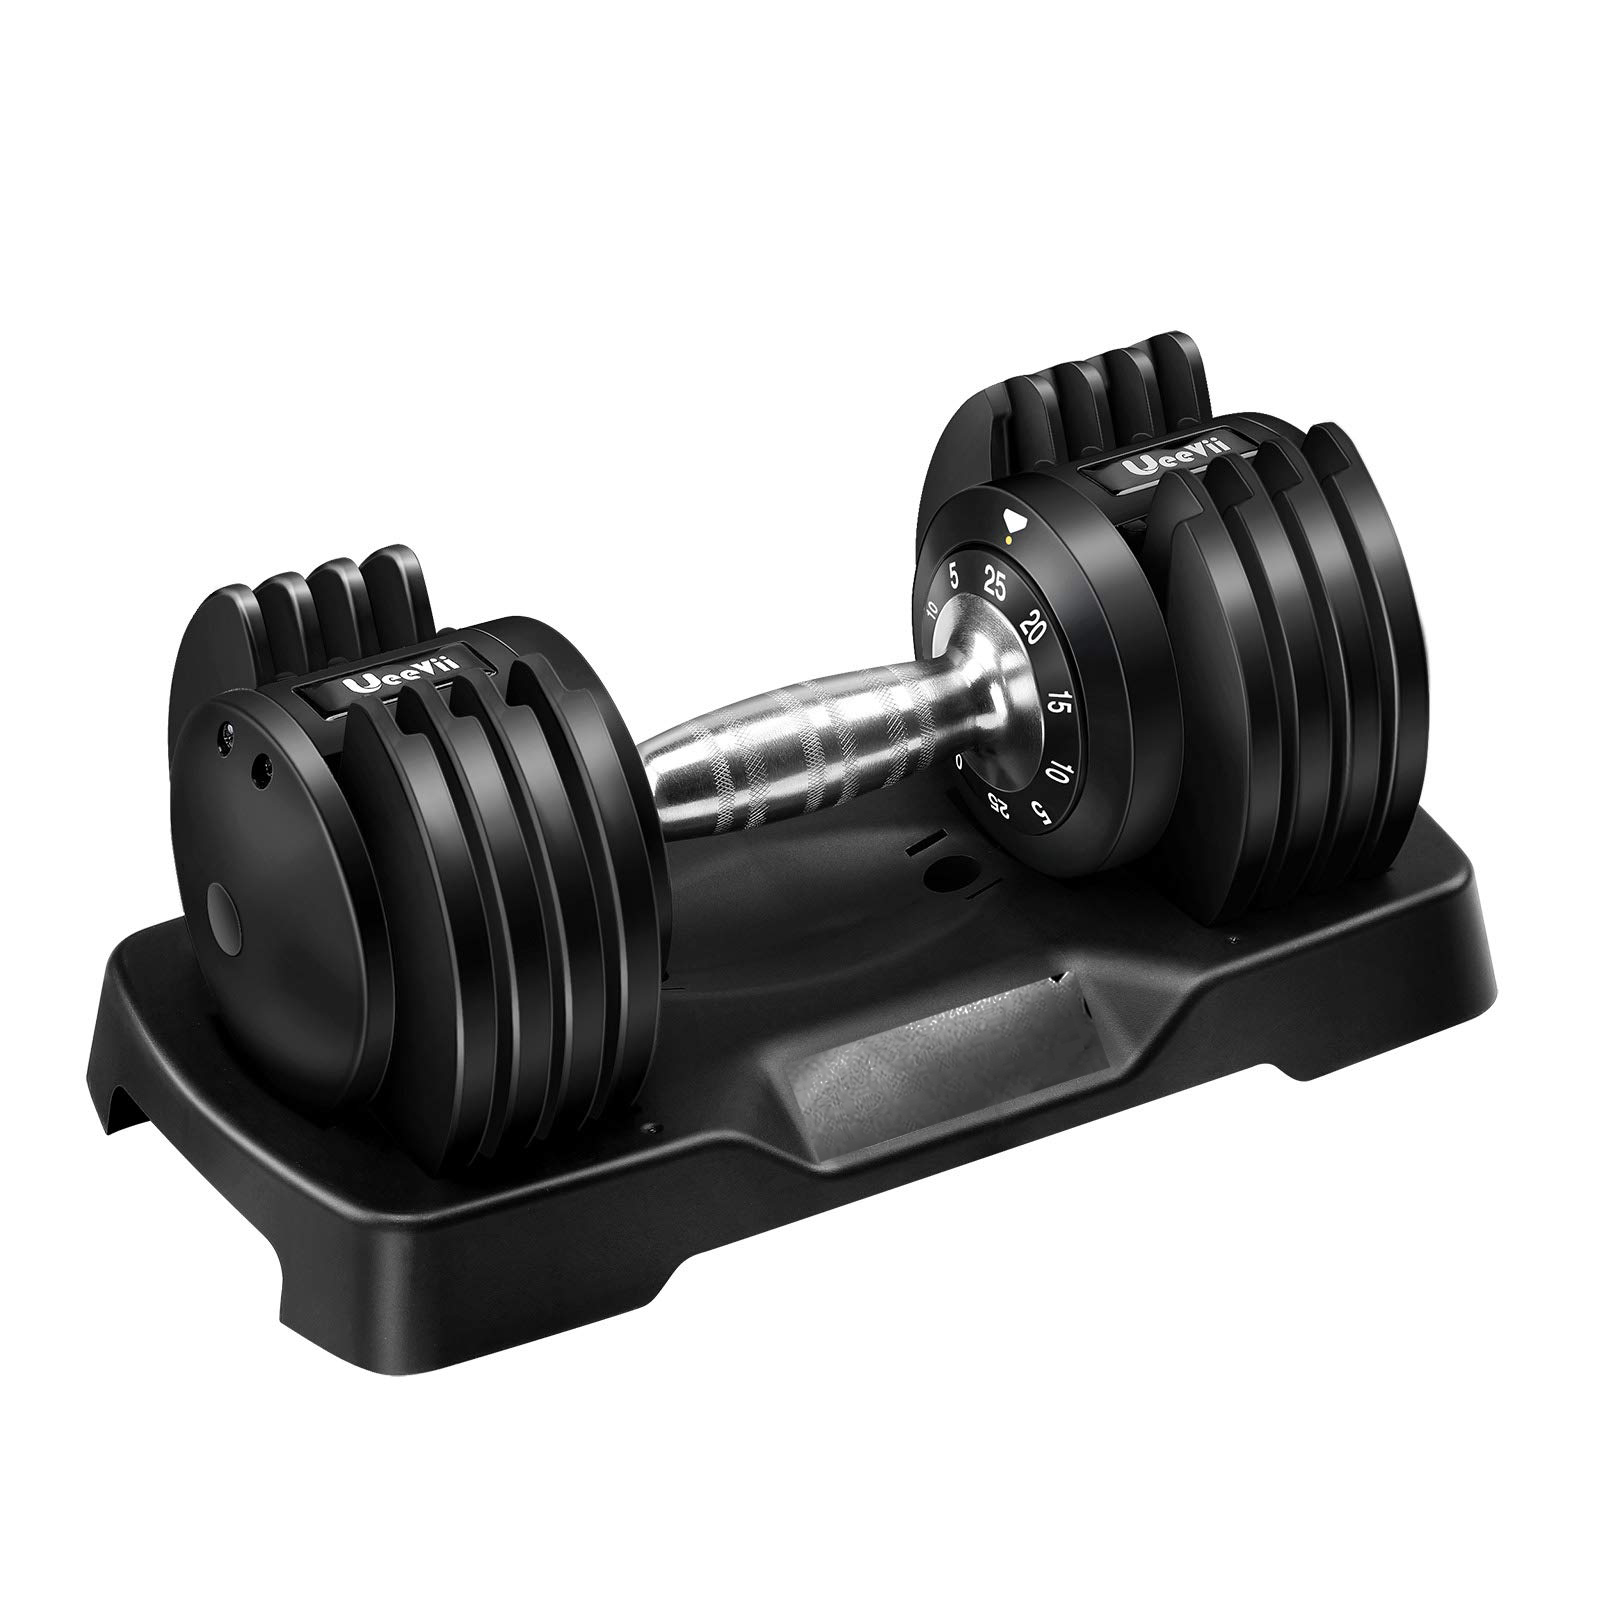 Adjust Weight Dumbbell by Turning Handle, Black Adjustable Dumbbell with Tray for Man & Woman Home Gym, with Anti-Slip Metal Handle Featured Image